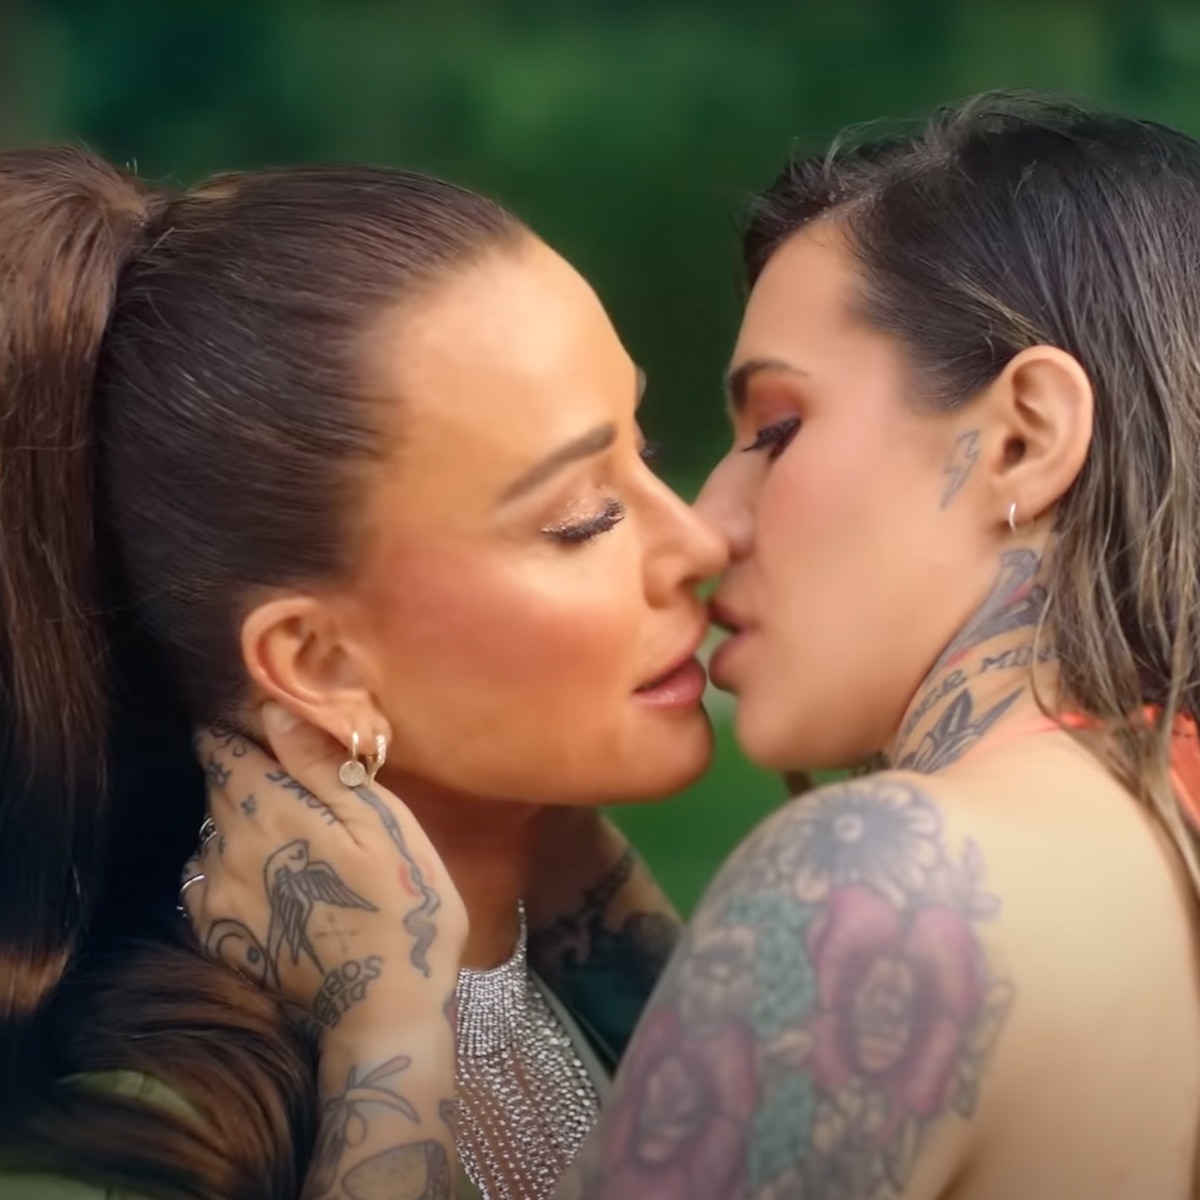 Kyle Richards and Morgan Wade Strip Down in Steamy New Music Video image